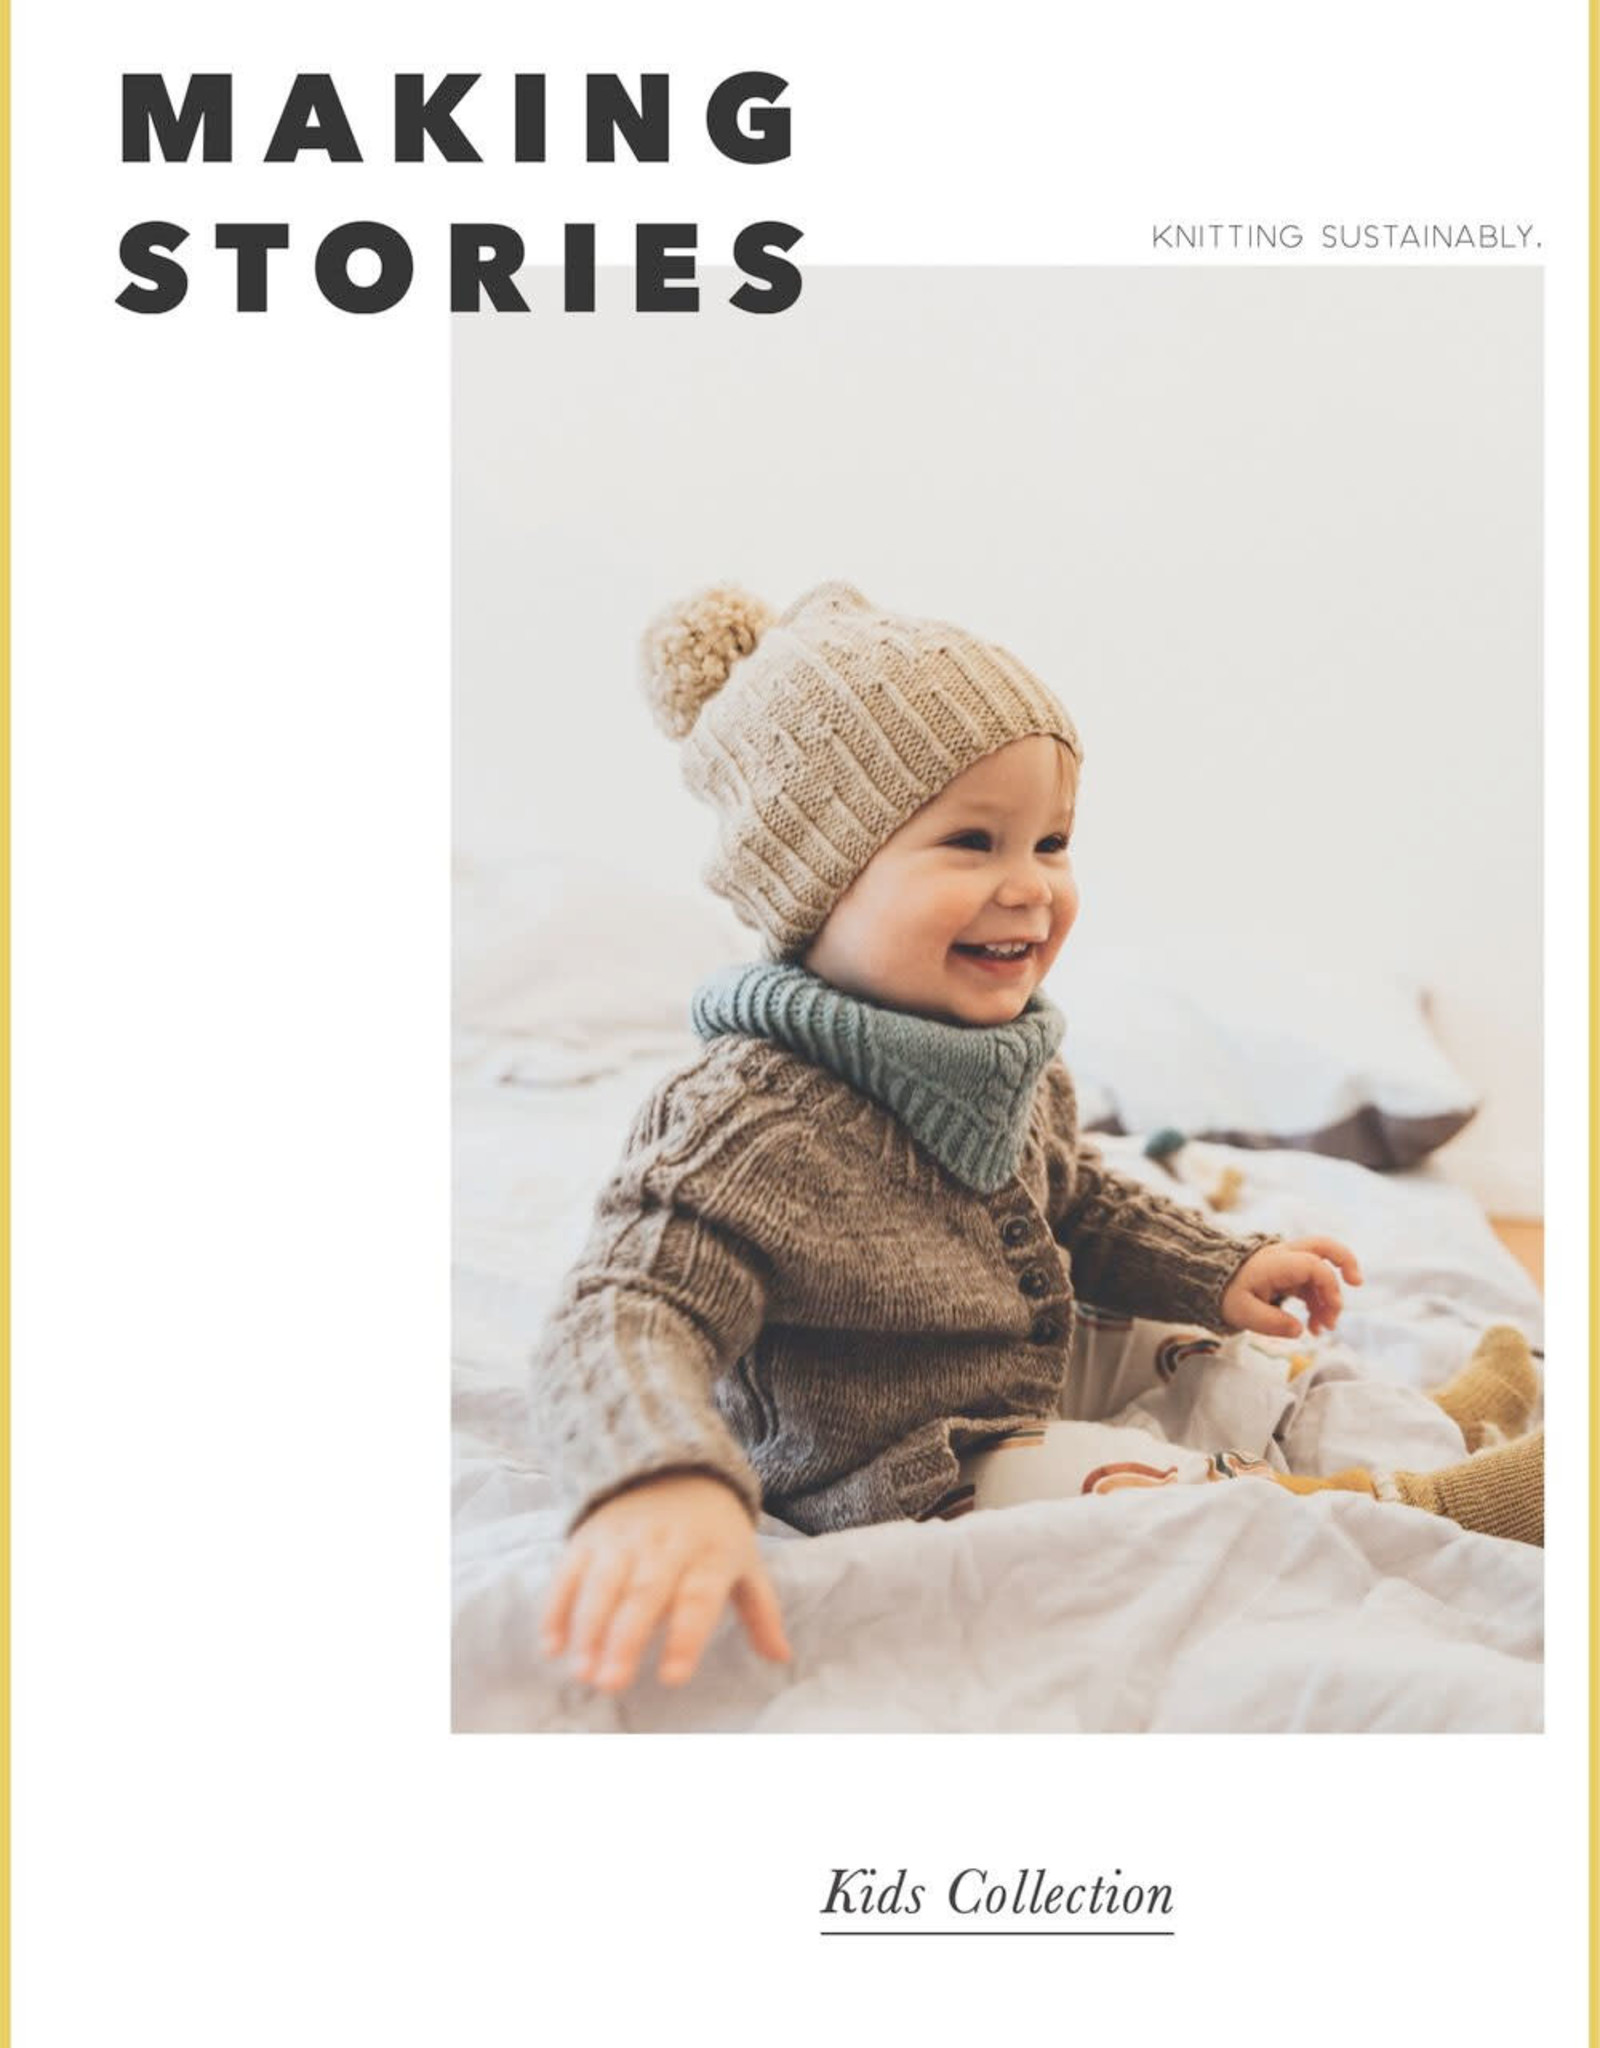 Book - Kids Collection by Making Stories